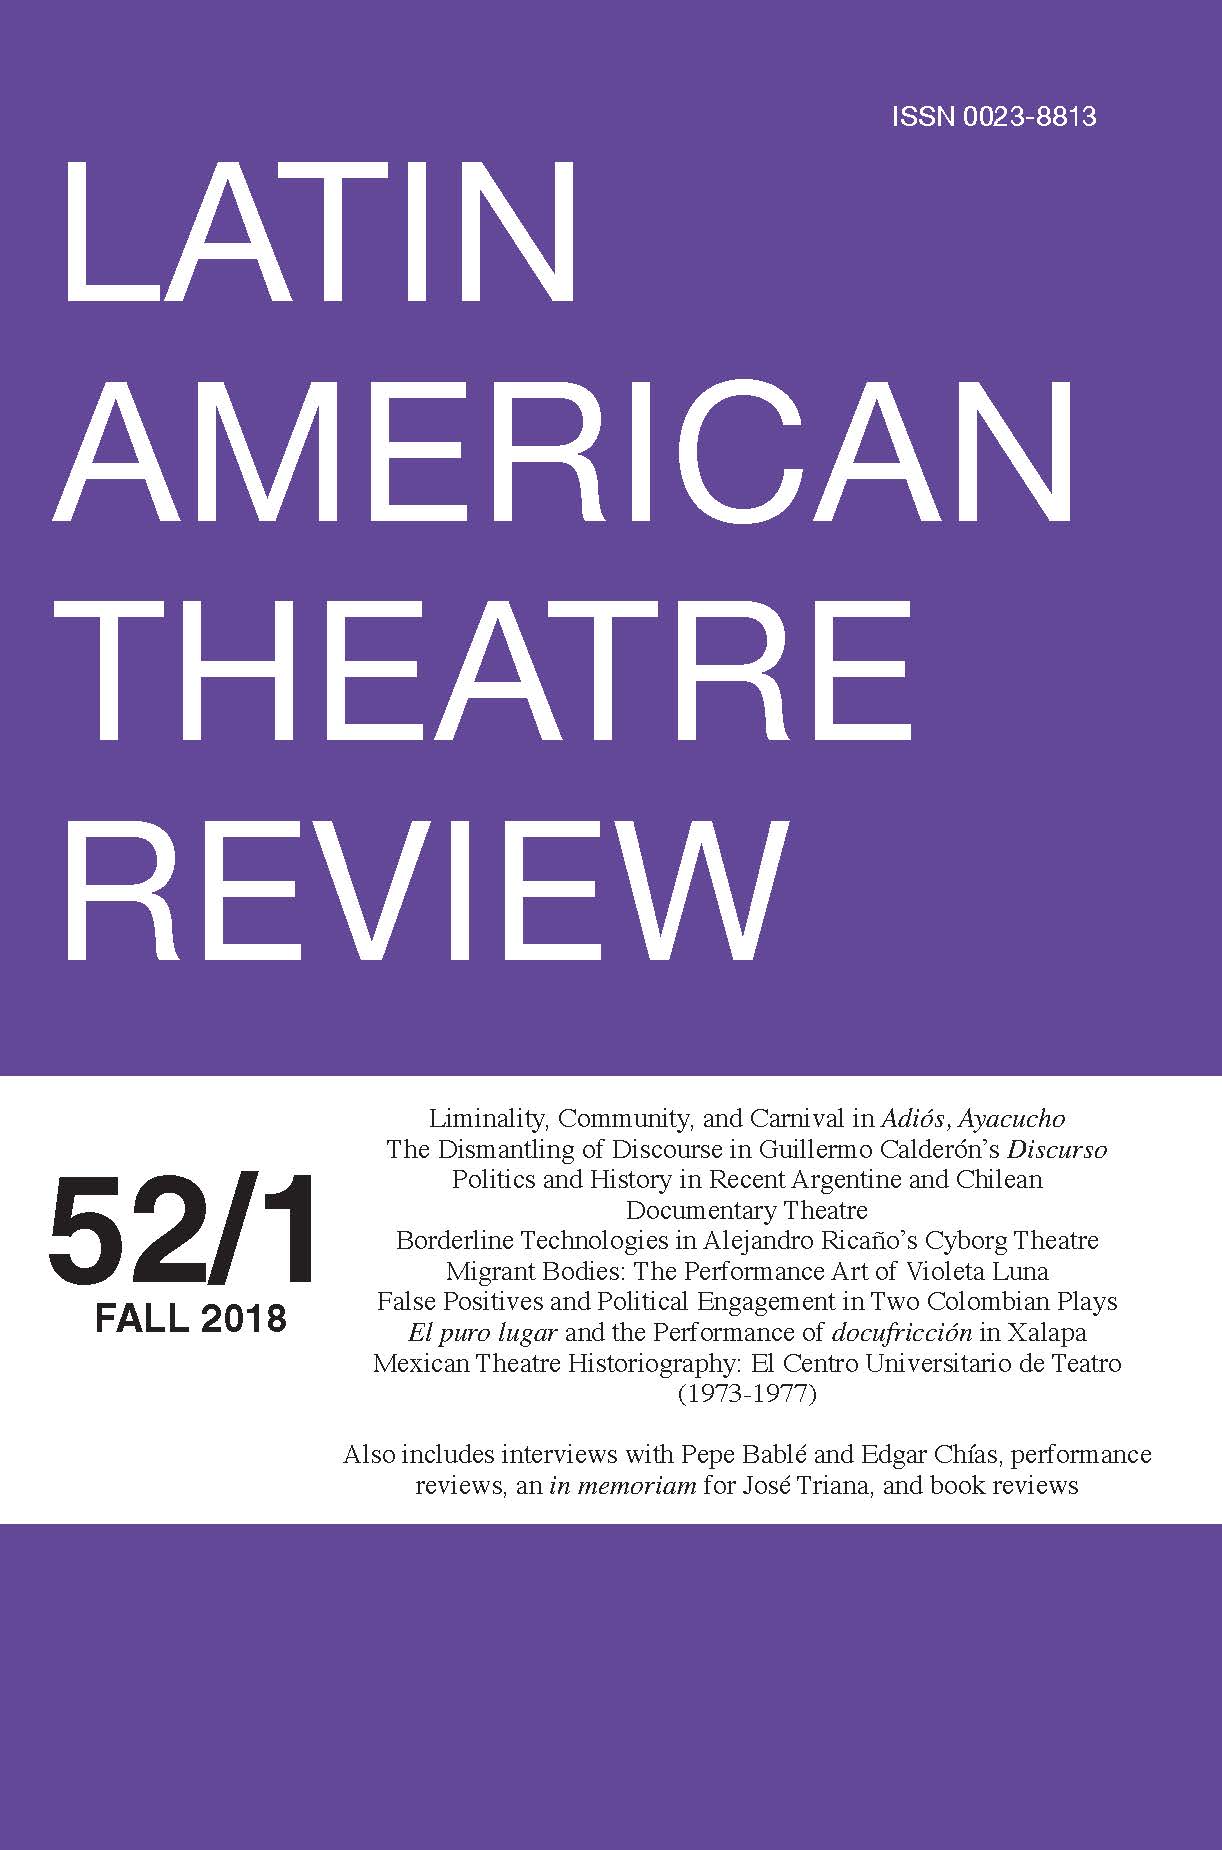 Latin American Theatre Review cover